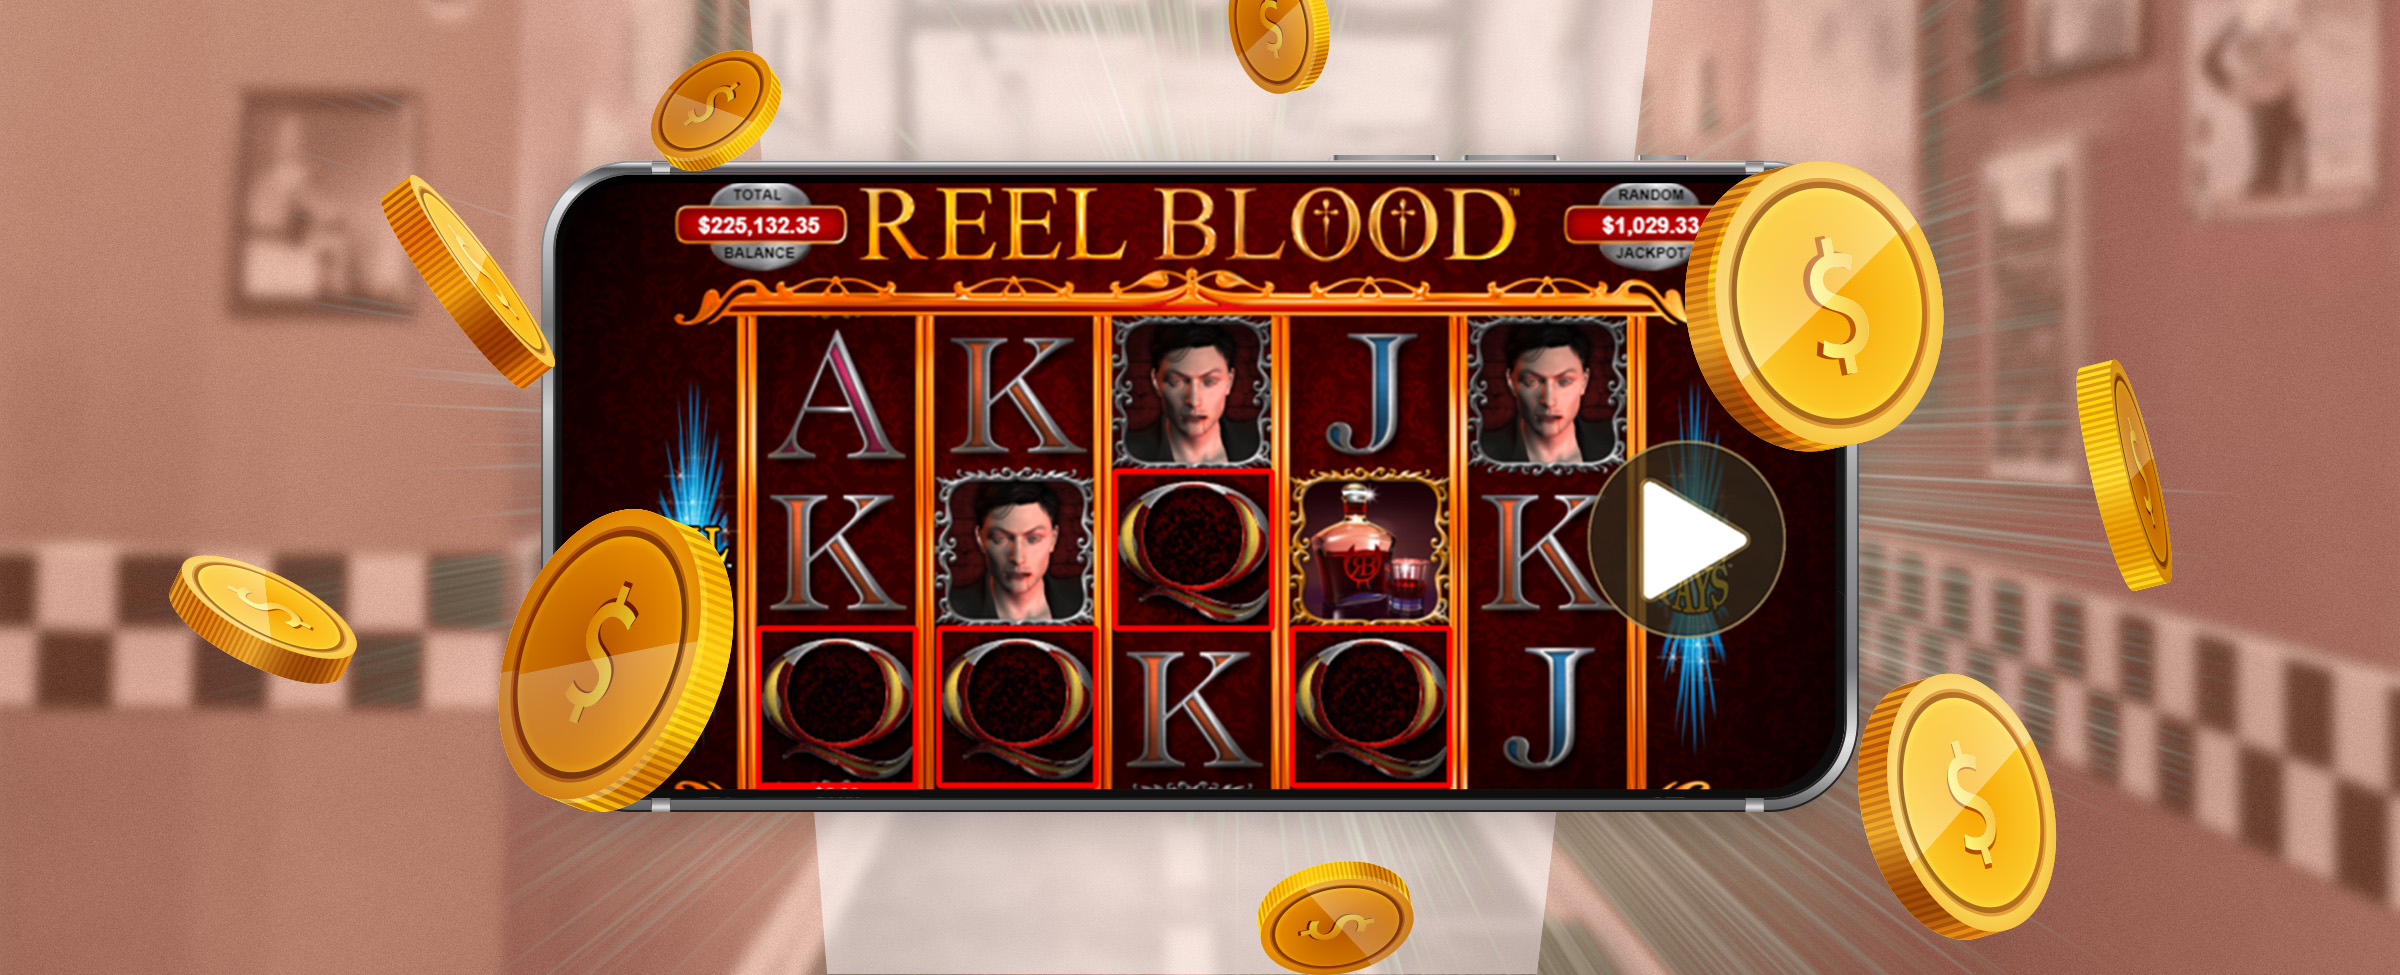 A faintly visible image of an old diner with a mobile phone picture in the center showing the Cafe Casino slot game Reel Blood, with gold coins levitating around it